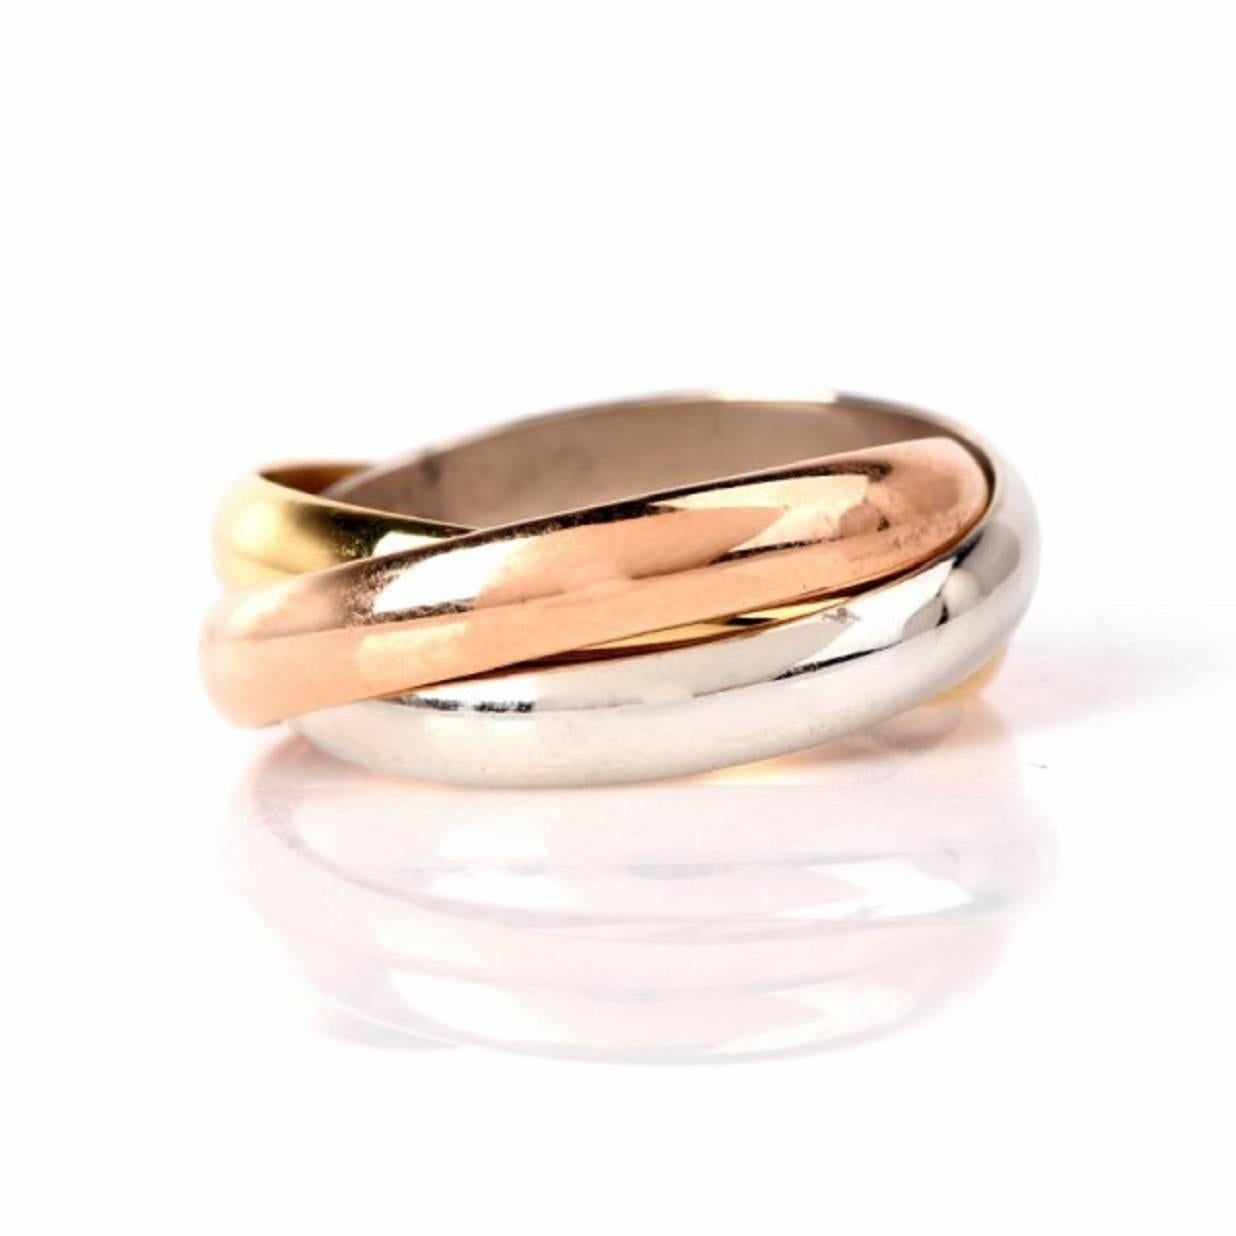 This Cartier trinity ring is crfted in a combination of solid 18K yellow, white and rose gold, weighing 12.6 grams, The trio of rings when worn measure measure 12 mm wide.  The Trinity ring is sjigned 'Cartier' for authencity, and bears the Ref. # 